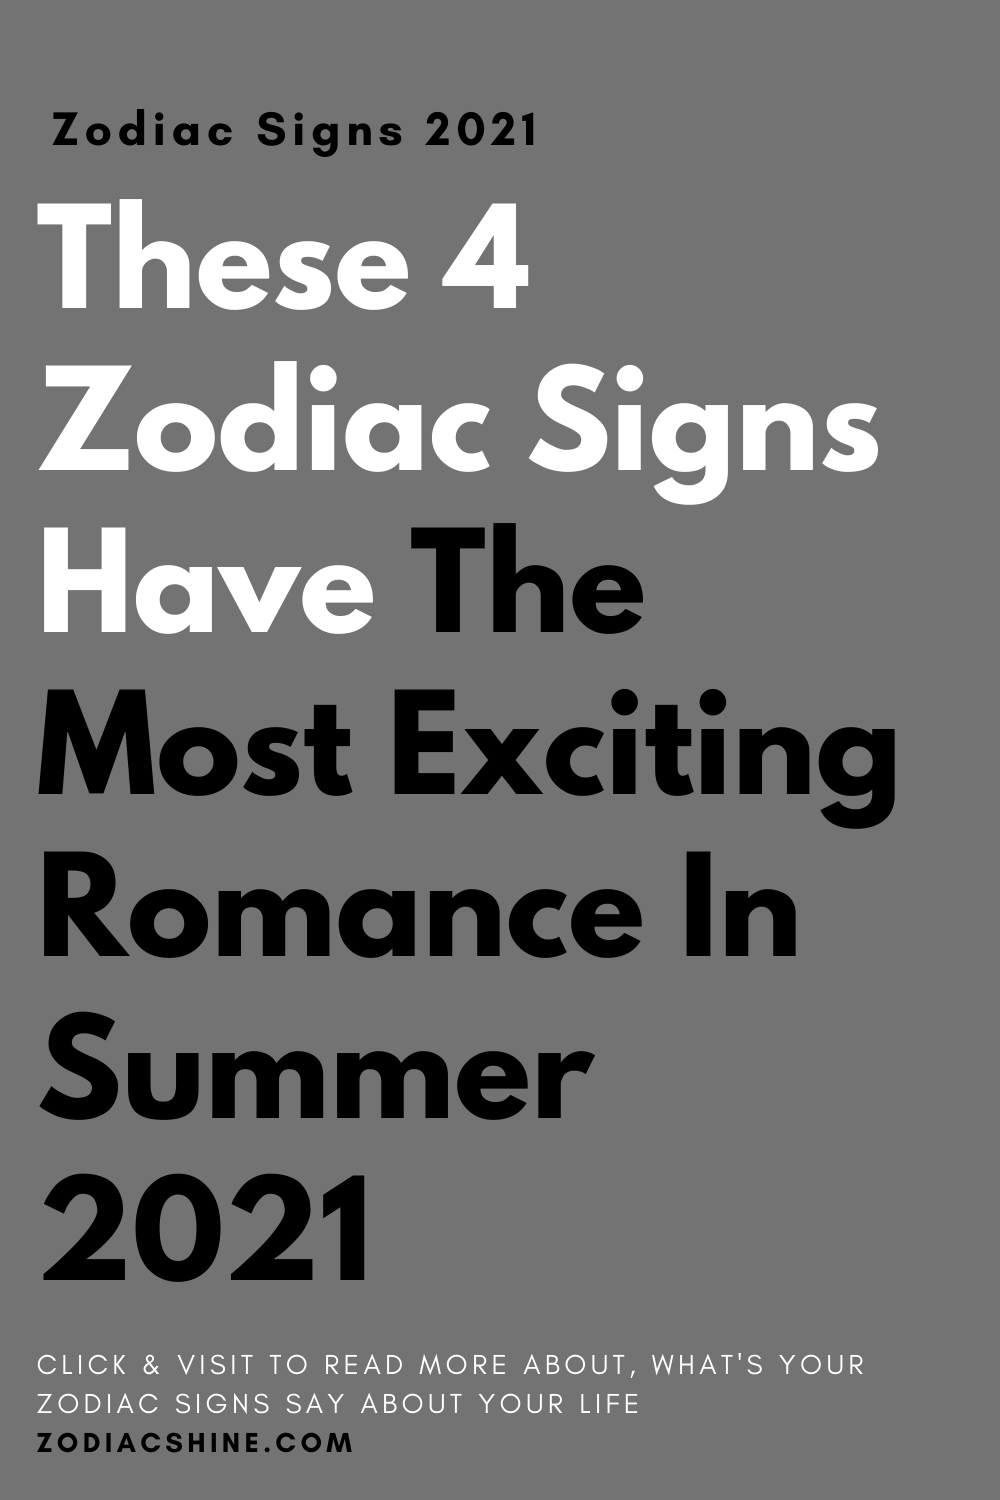 These 4 Zodiac Signs Have The Most Exciting Romance In Summer 2021